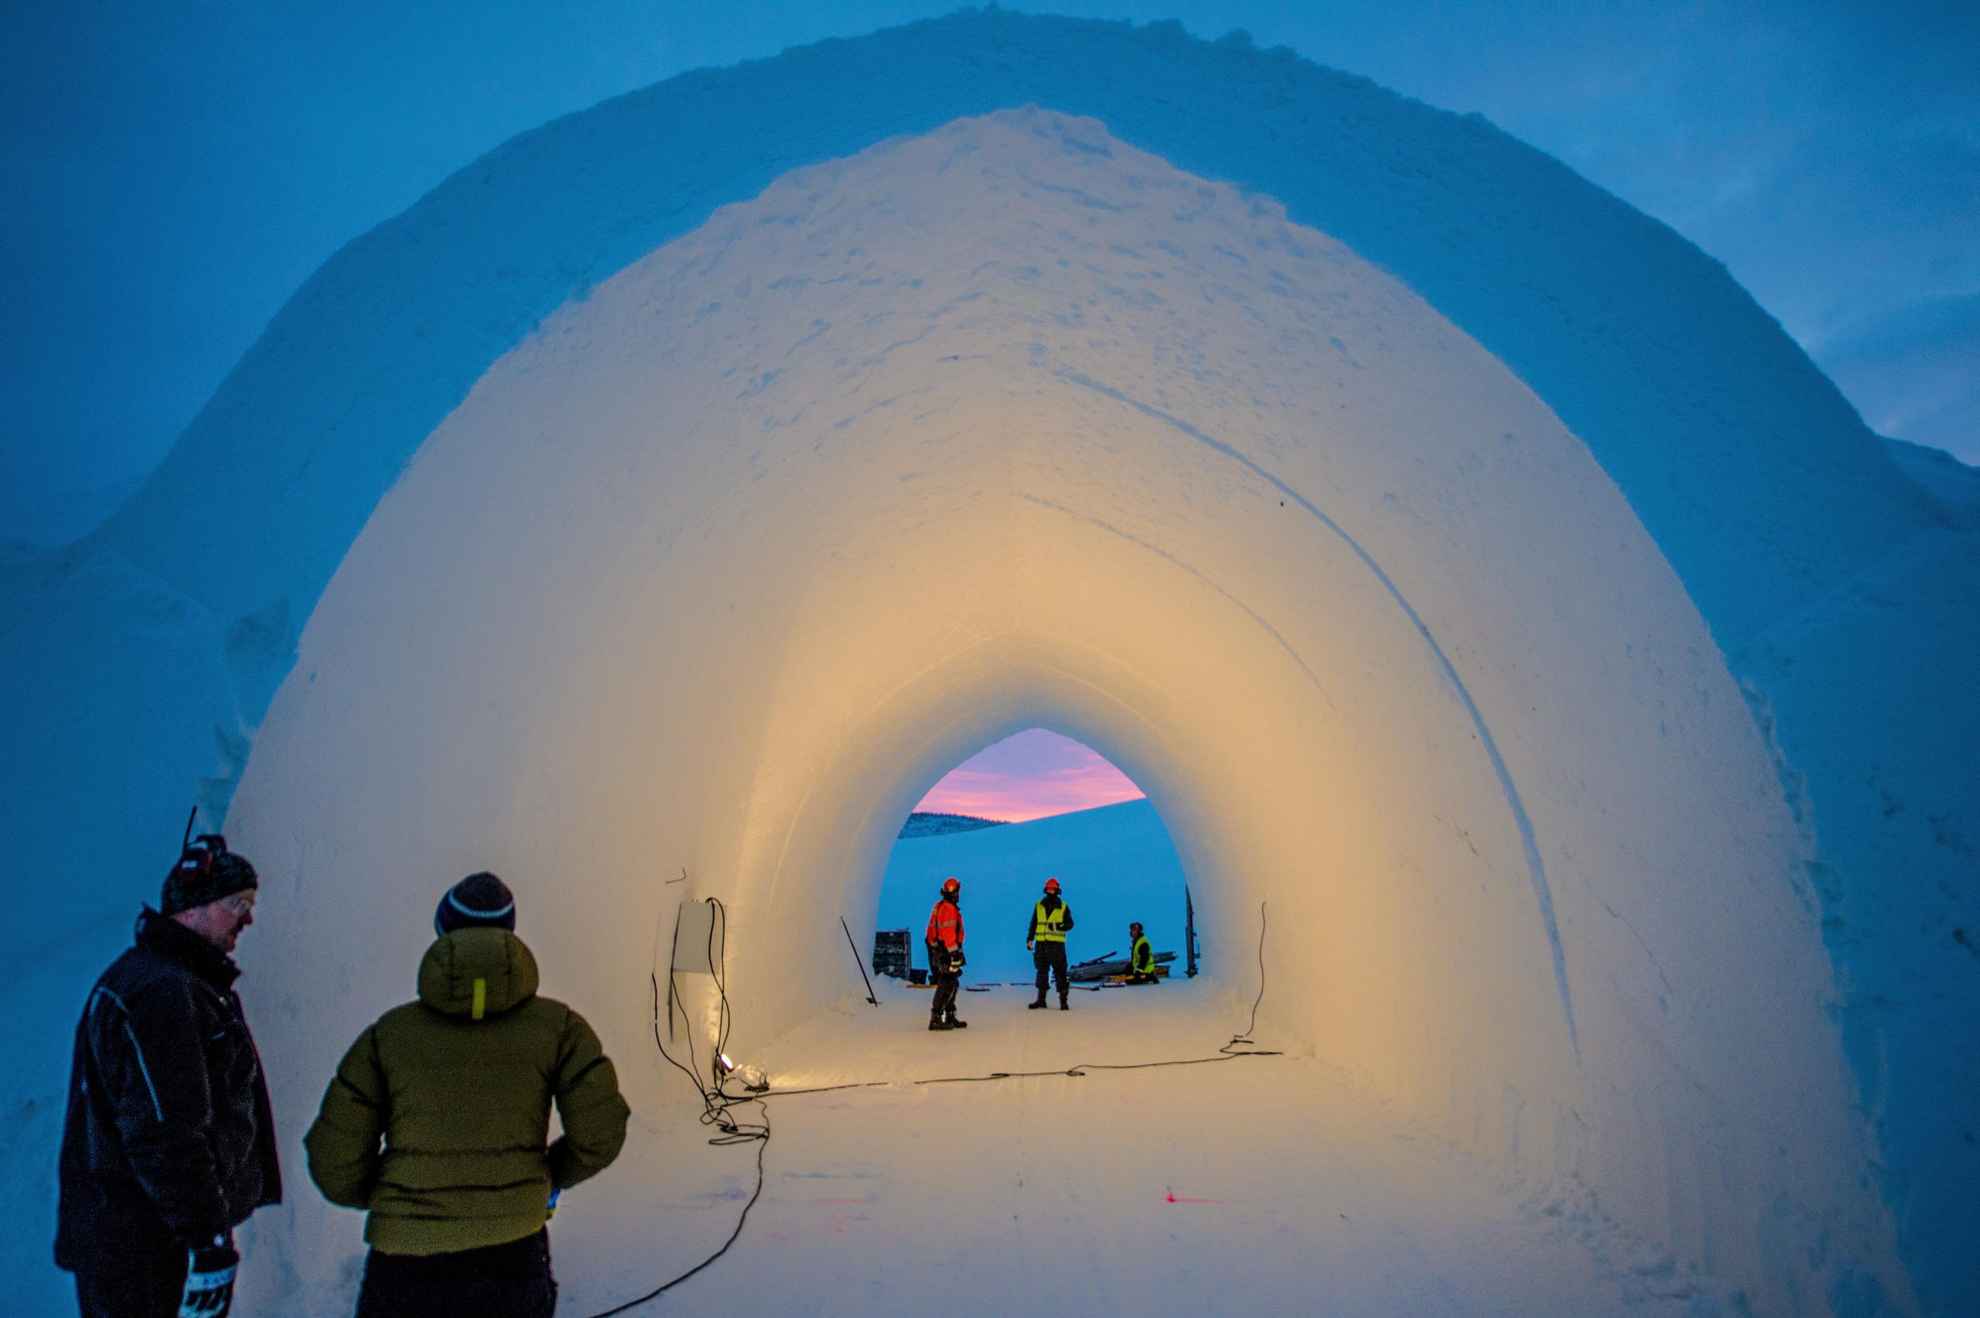 Building the ICEHOTEL